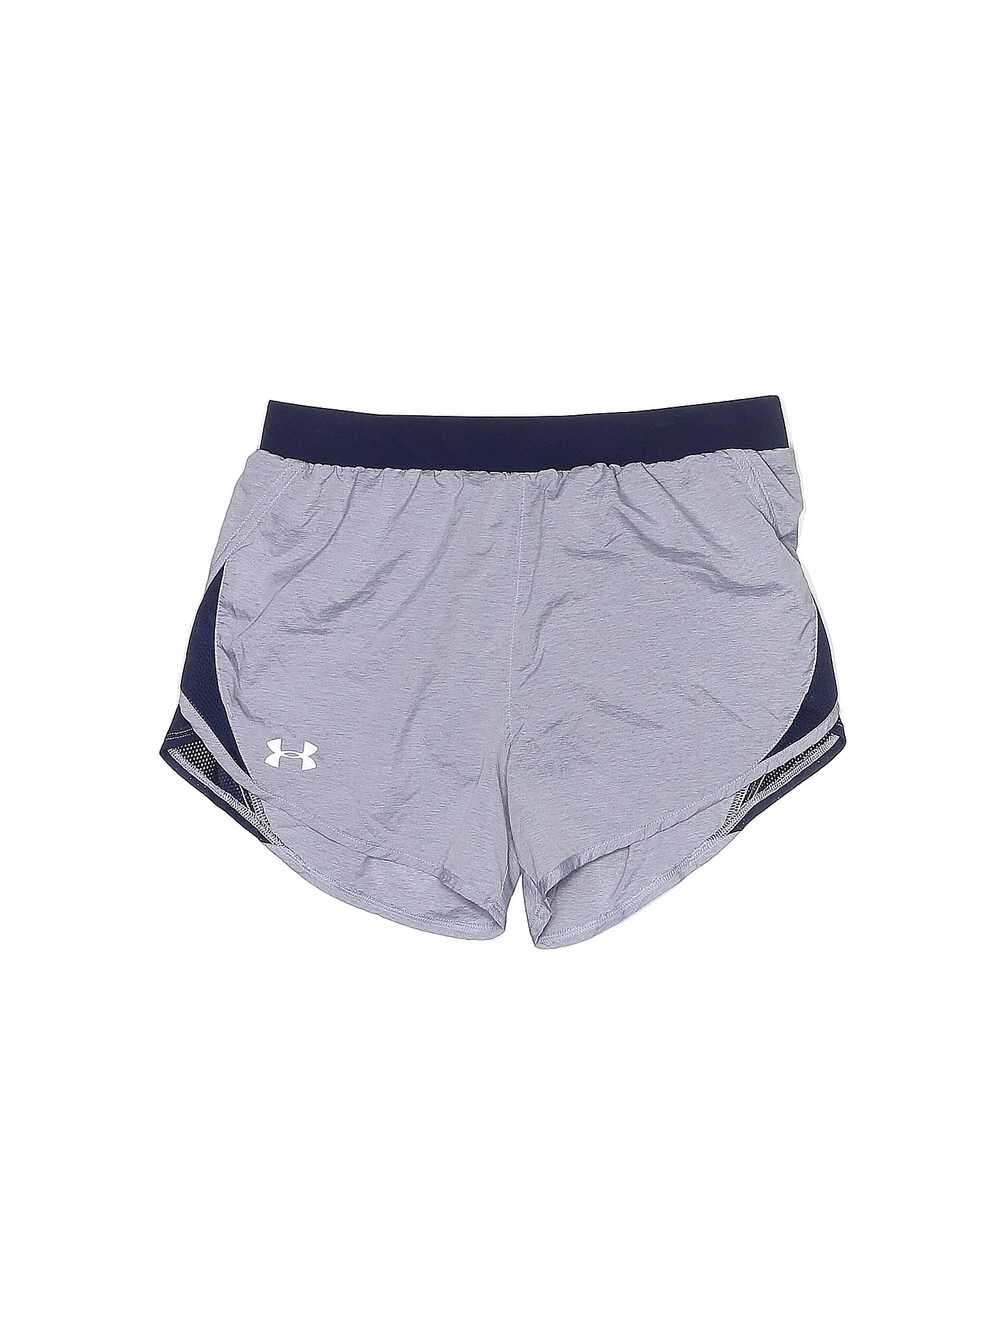 Under Armour Women Silver Athletic Shorts S - image 1